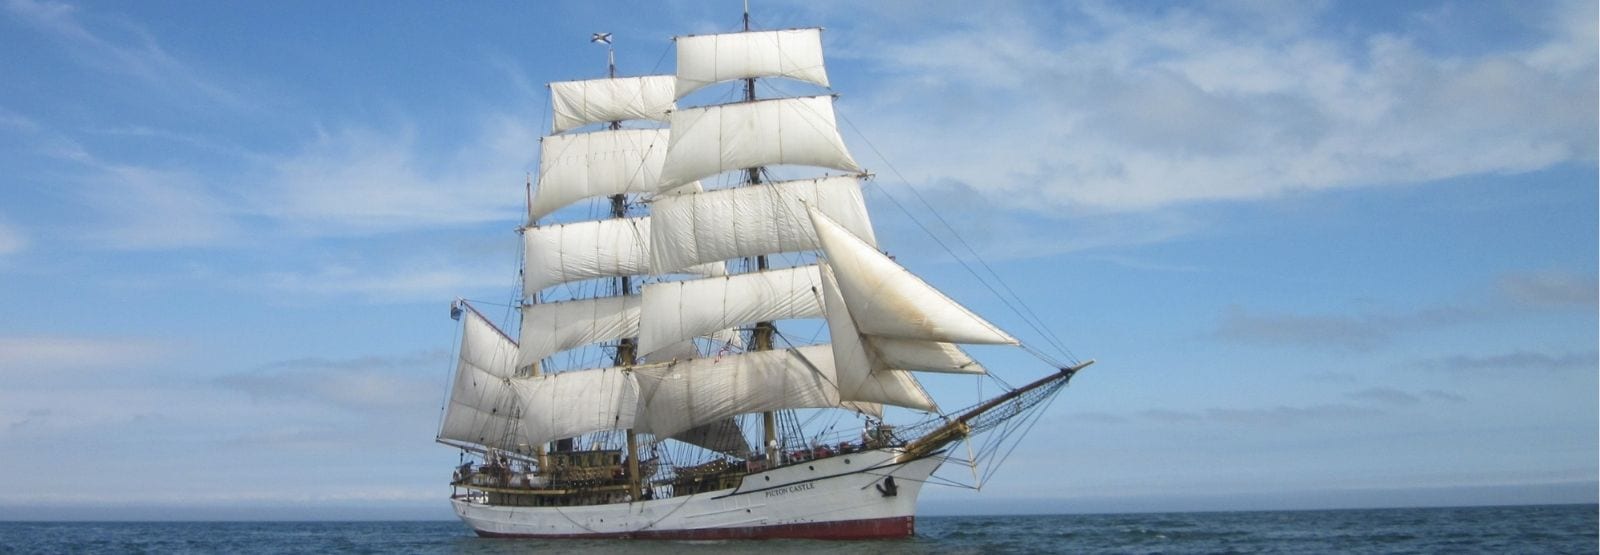 World's largest sail ship is steeled for ocean travel - steelStories 